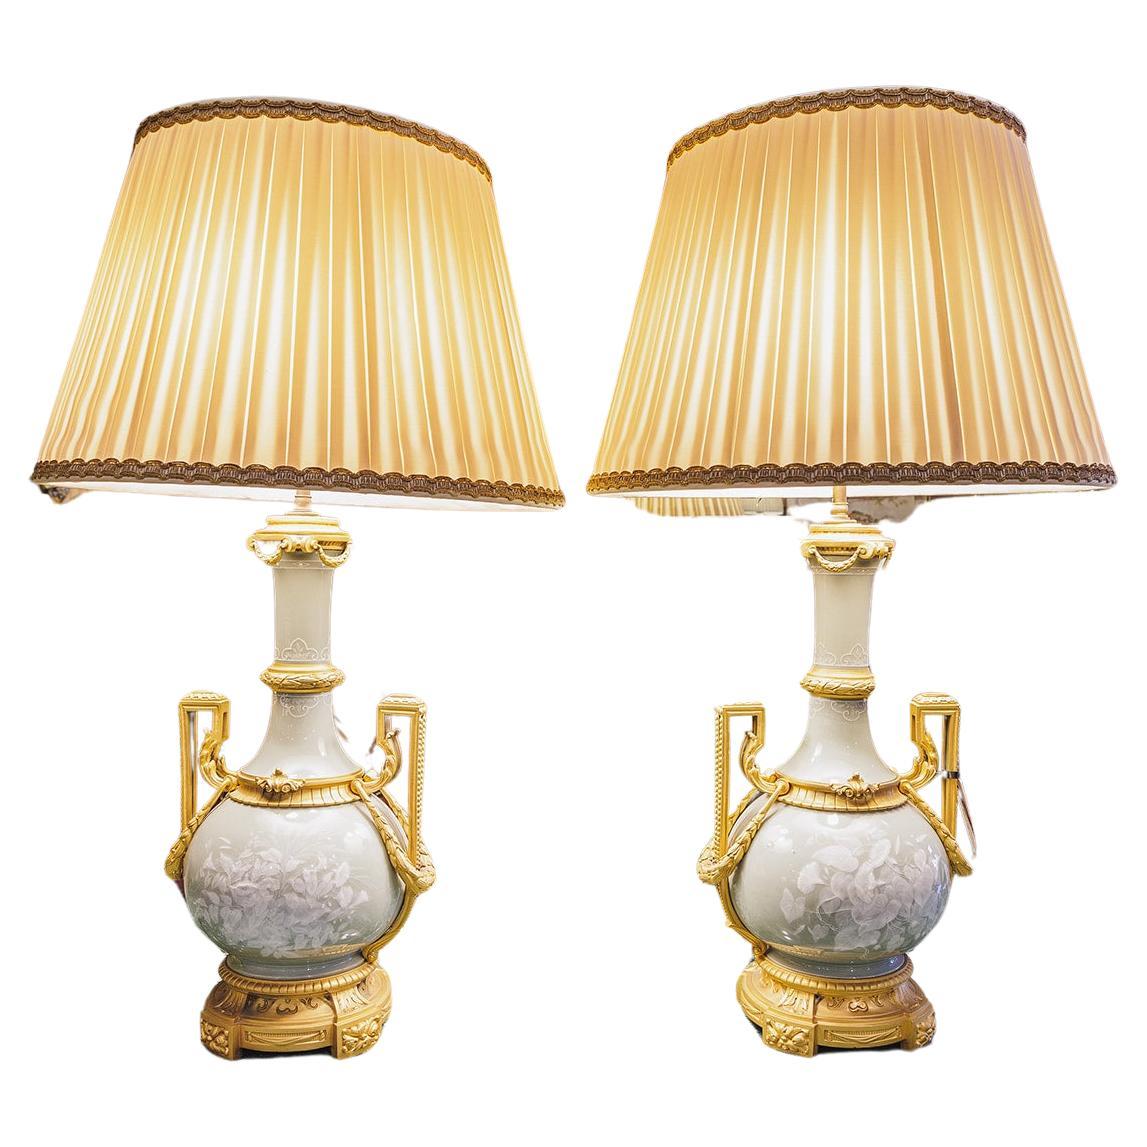 A very fine pair of 19th century French celadon porcelain and gilt bronze mounted lamps . Finest quality . Large size 